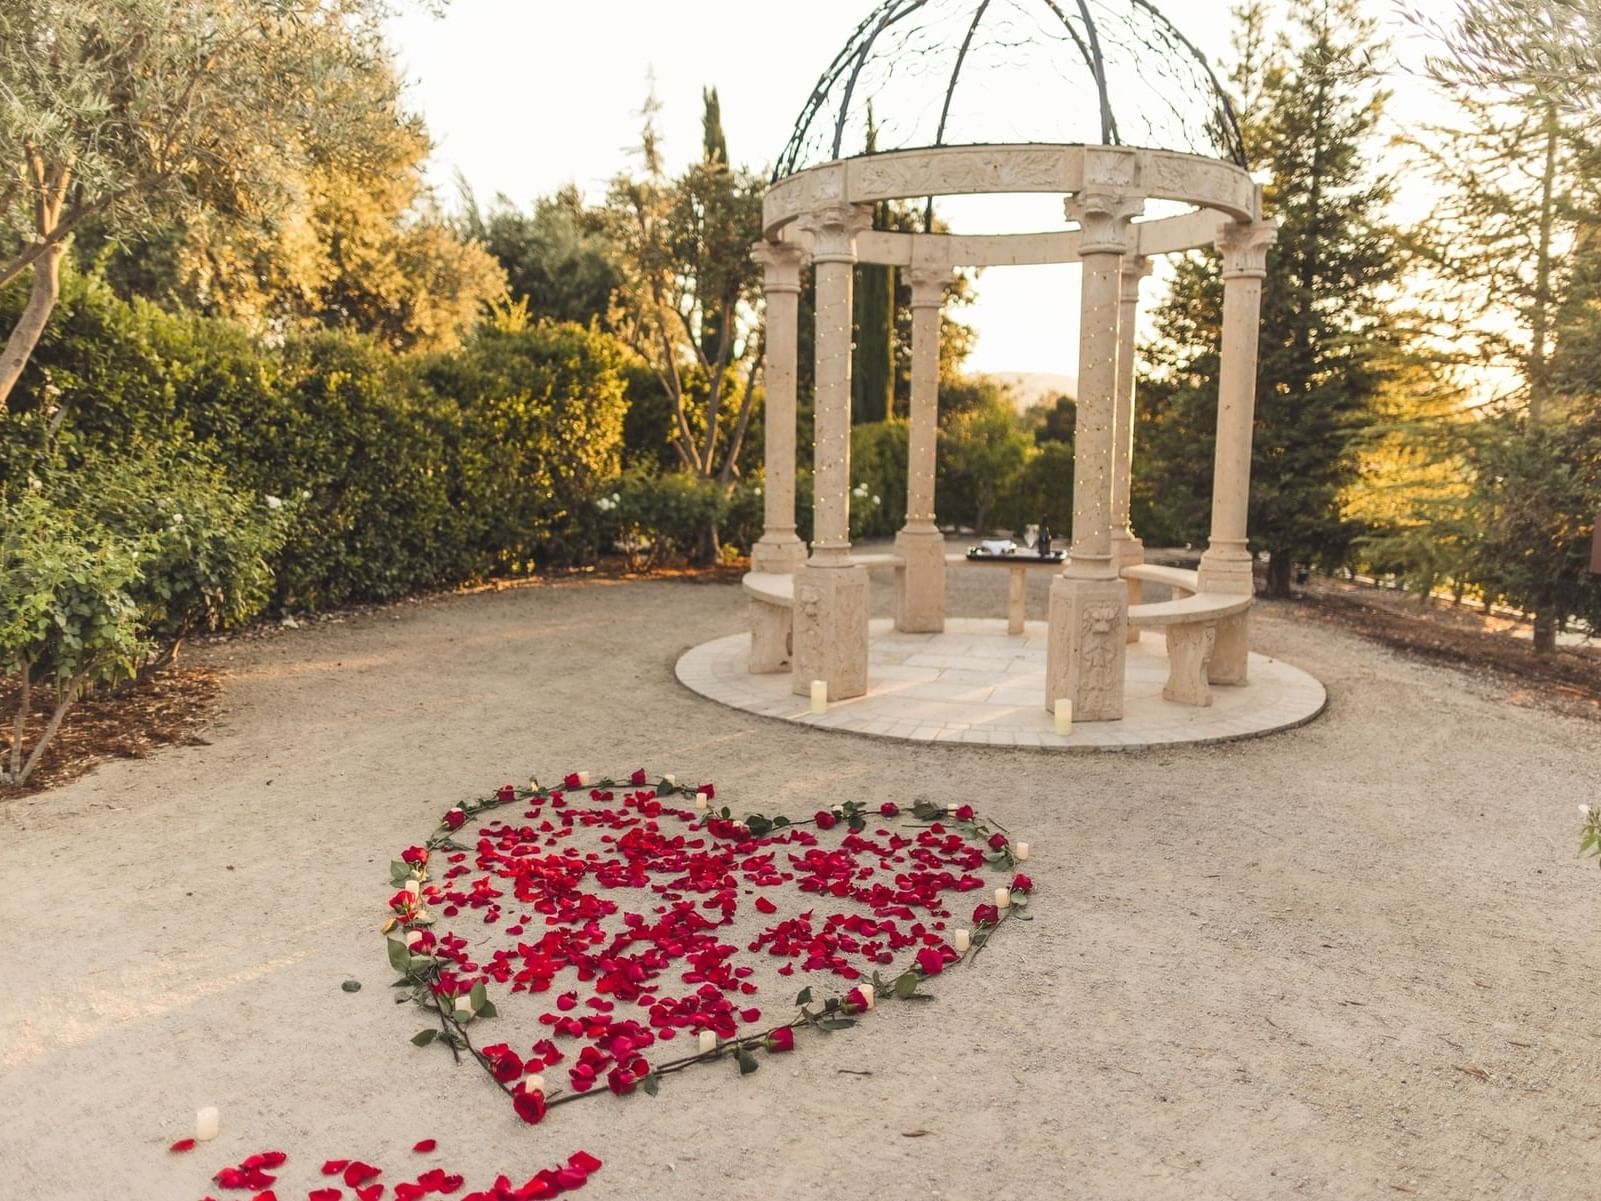 Heart shaped Rose Petals in Front of Stone Gazebo